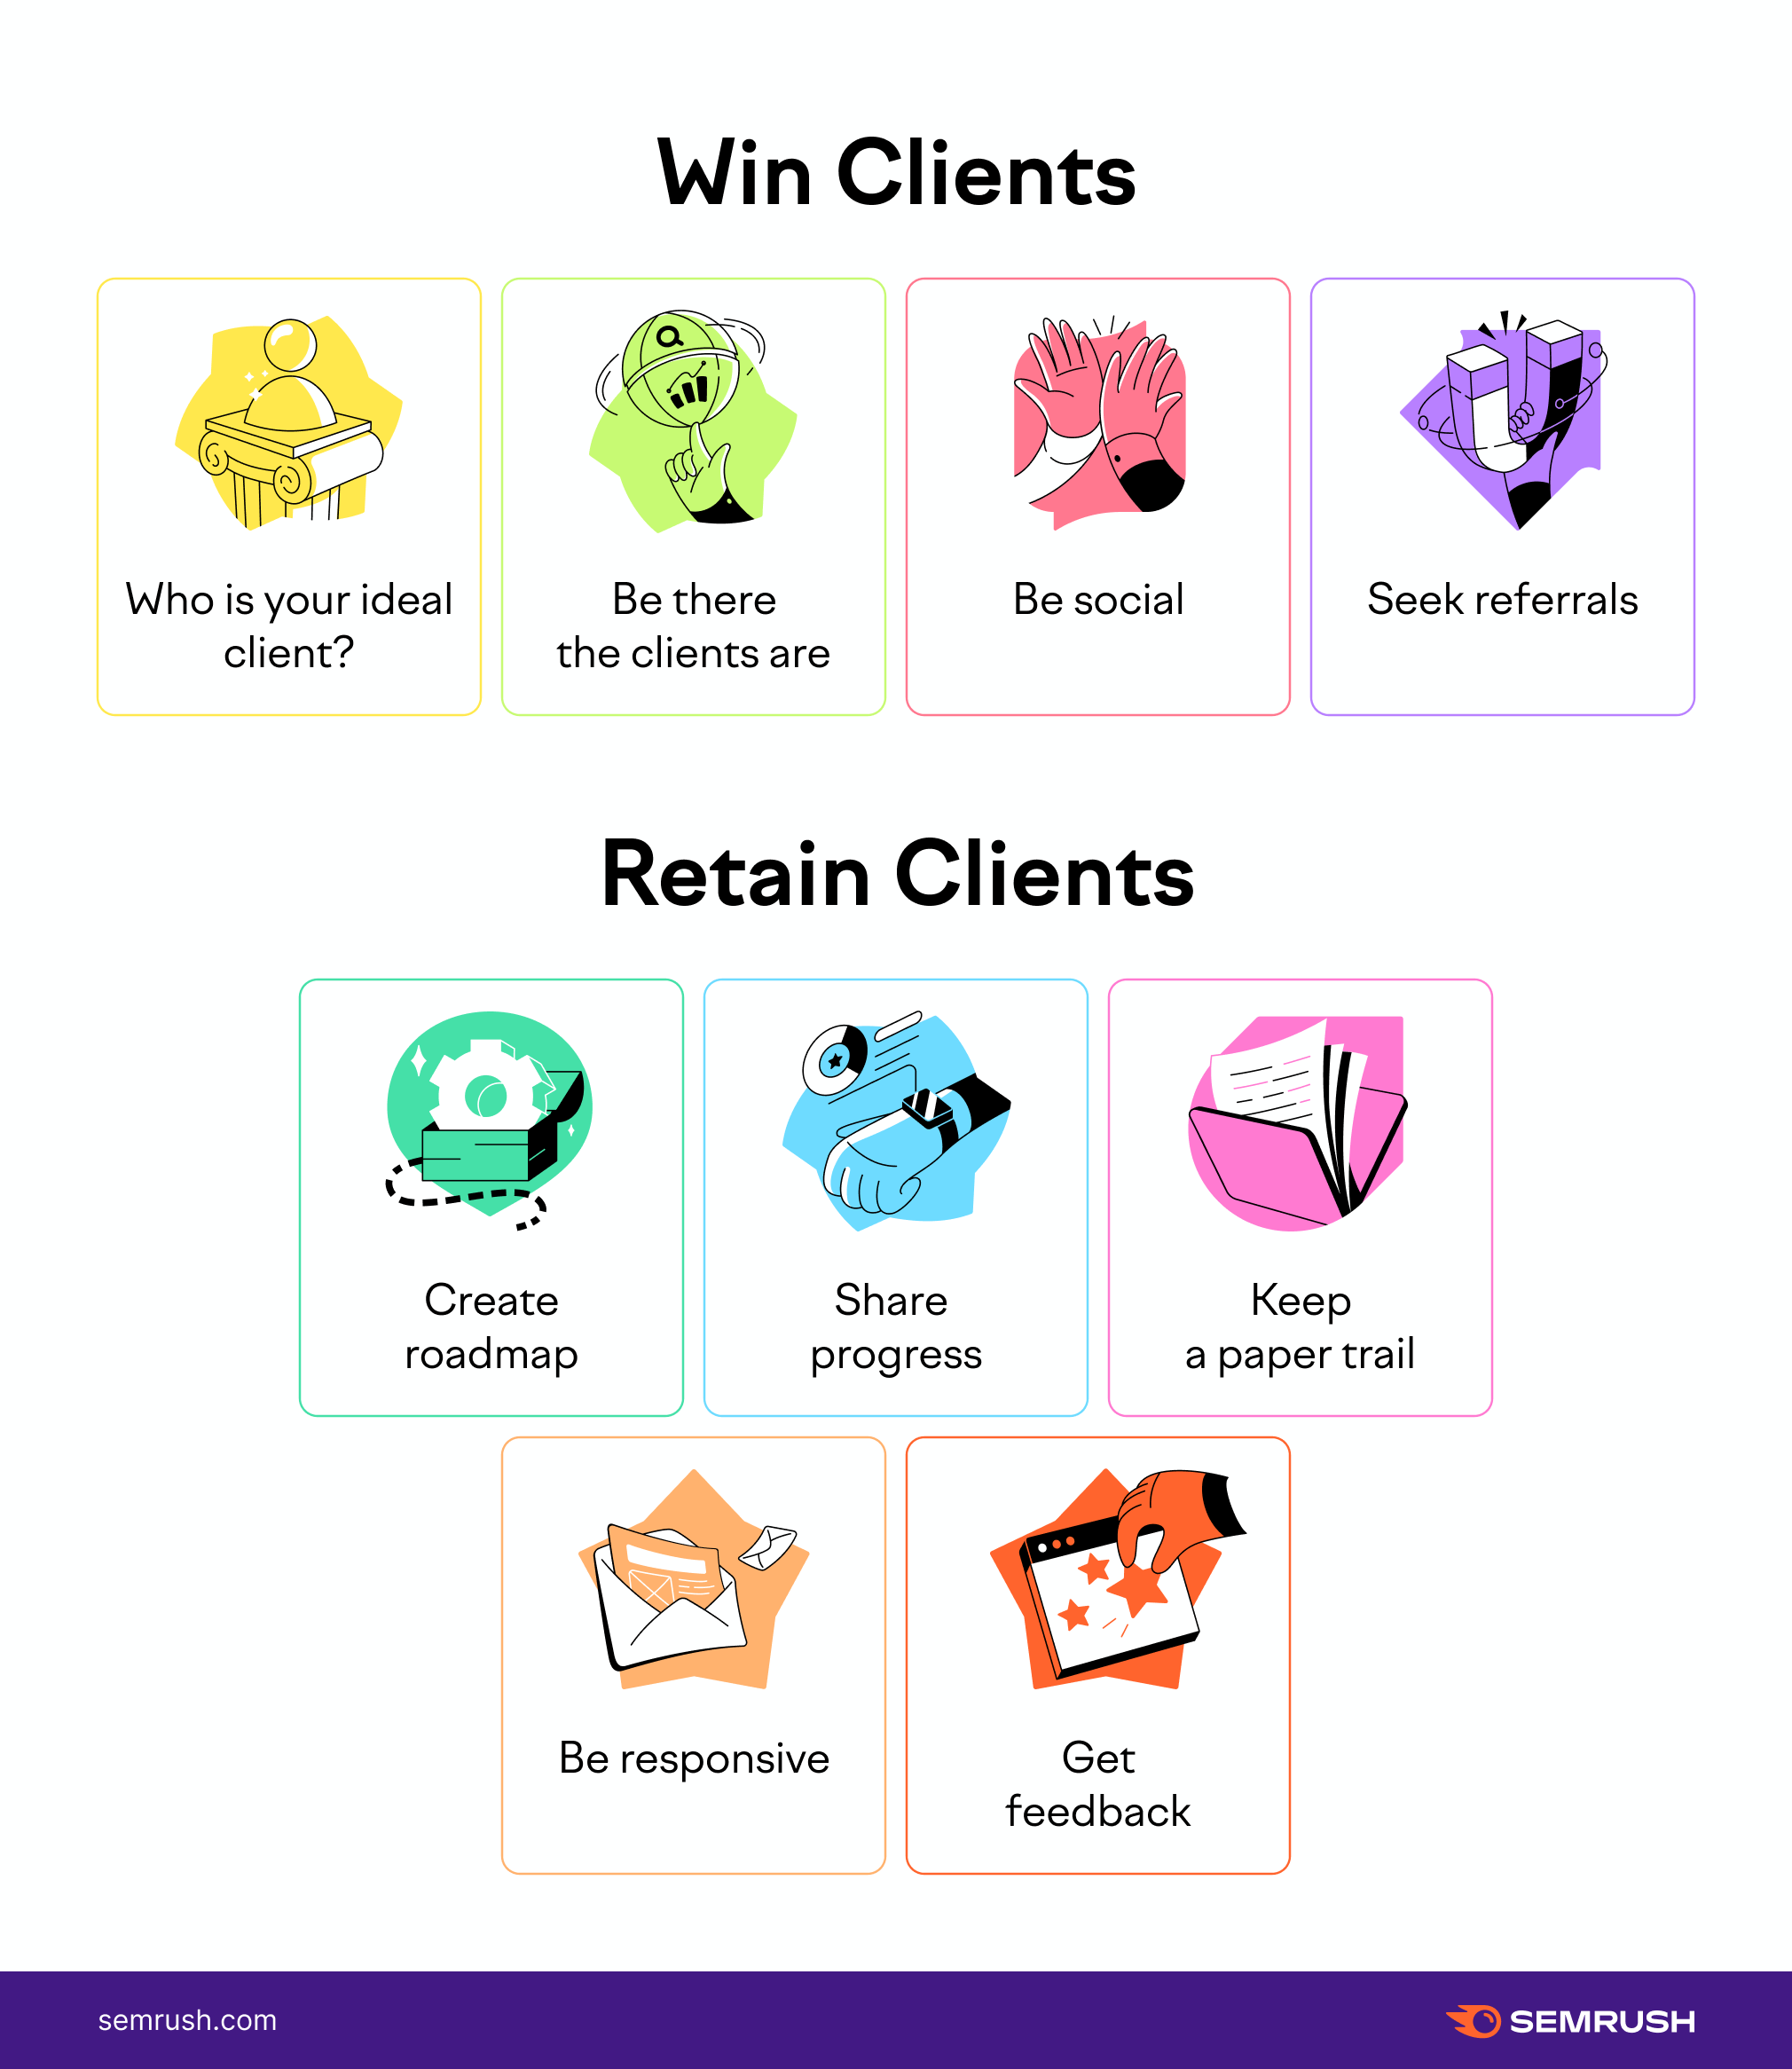 Client Management: Win and Retain More Clients